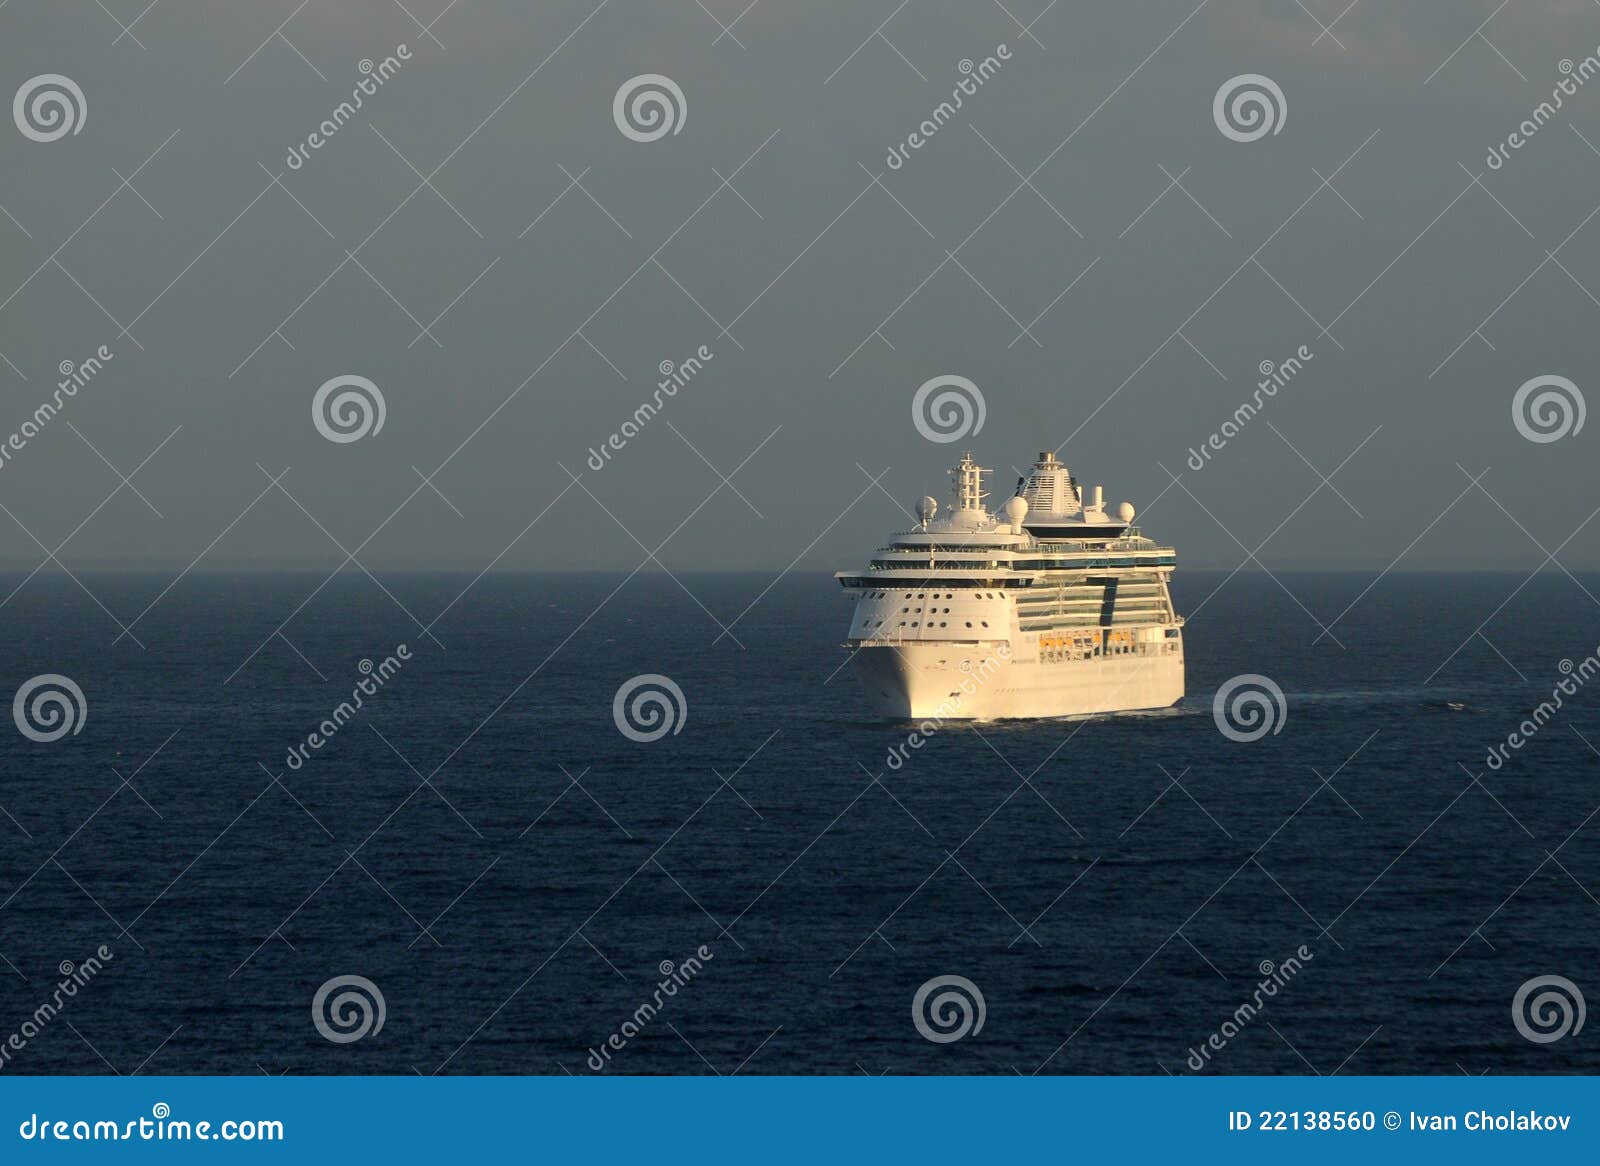 Cruise ship at dawn. Modern white ocean liner in early morning